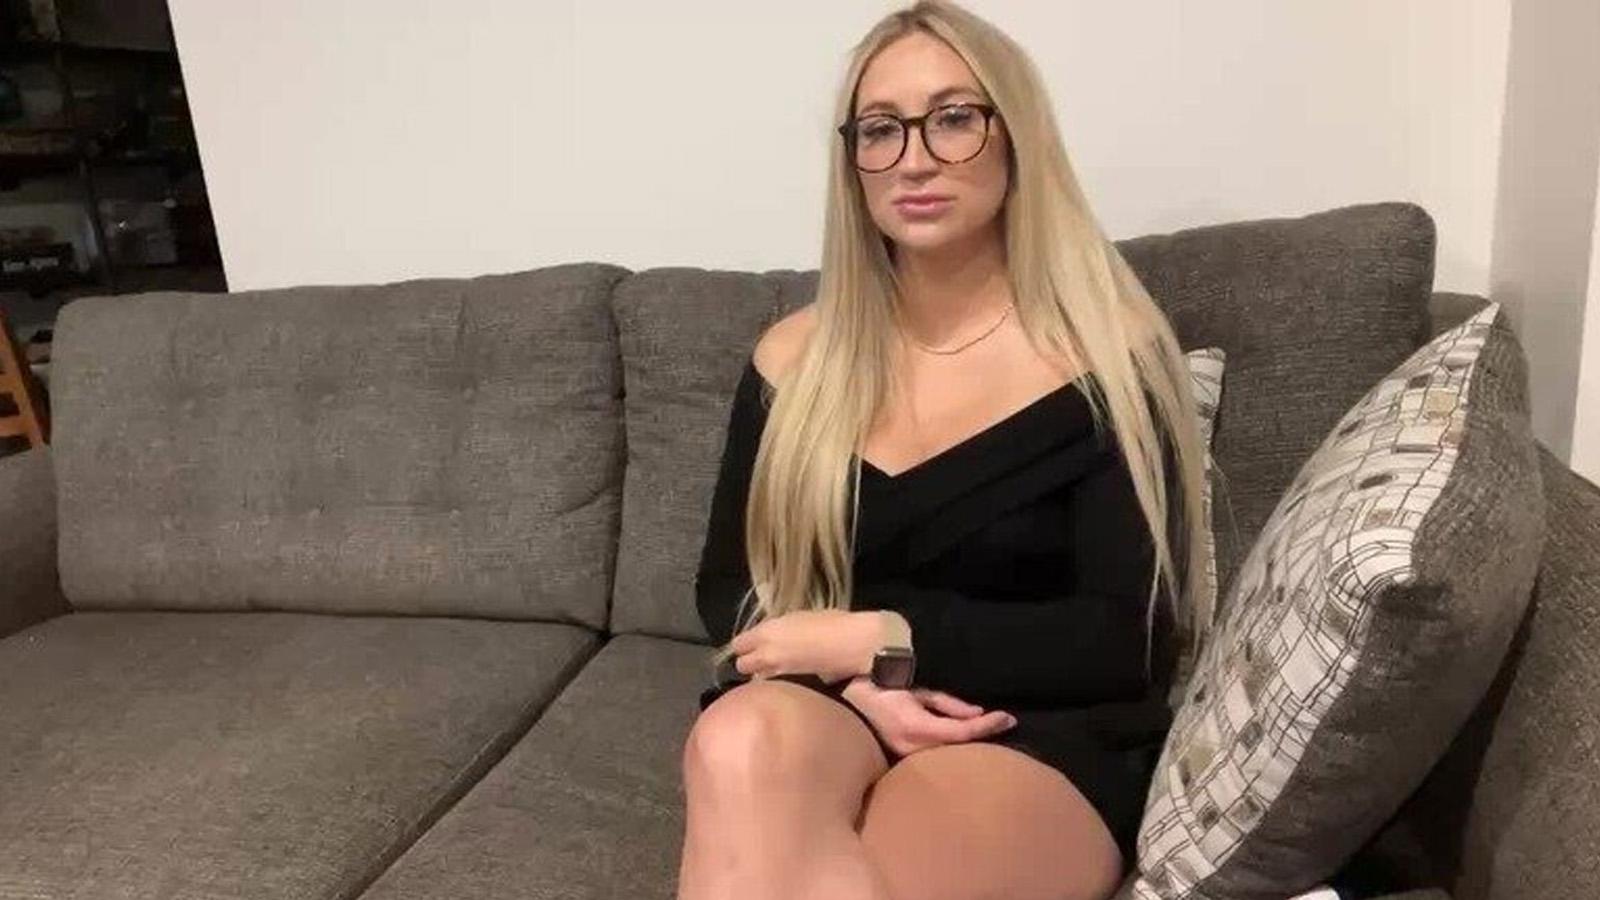 High school teacher suspended after students discover OnlyFans account